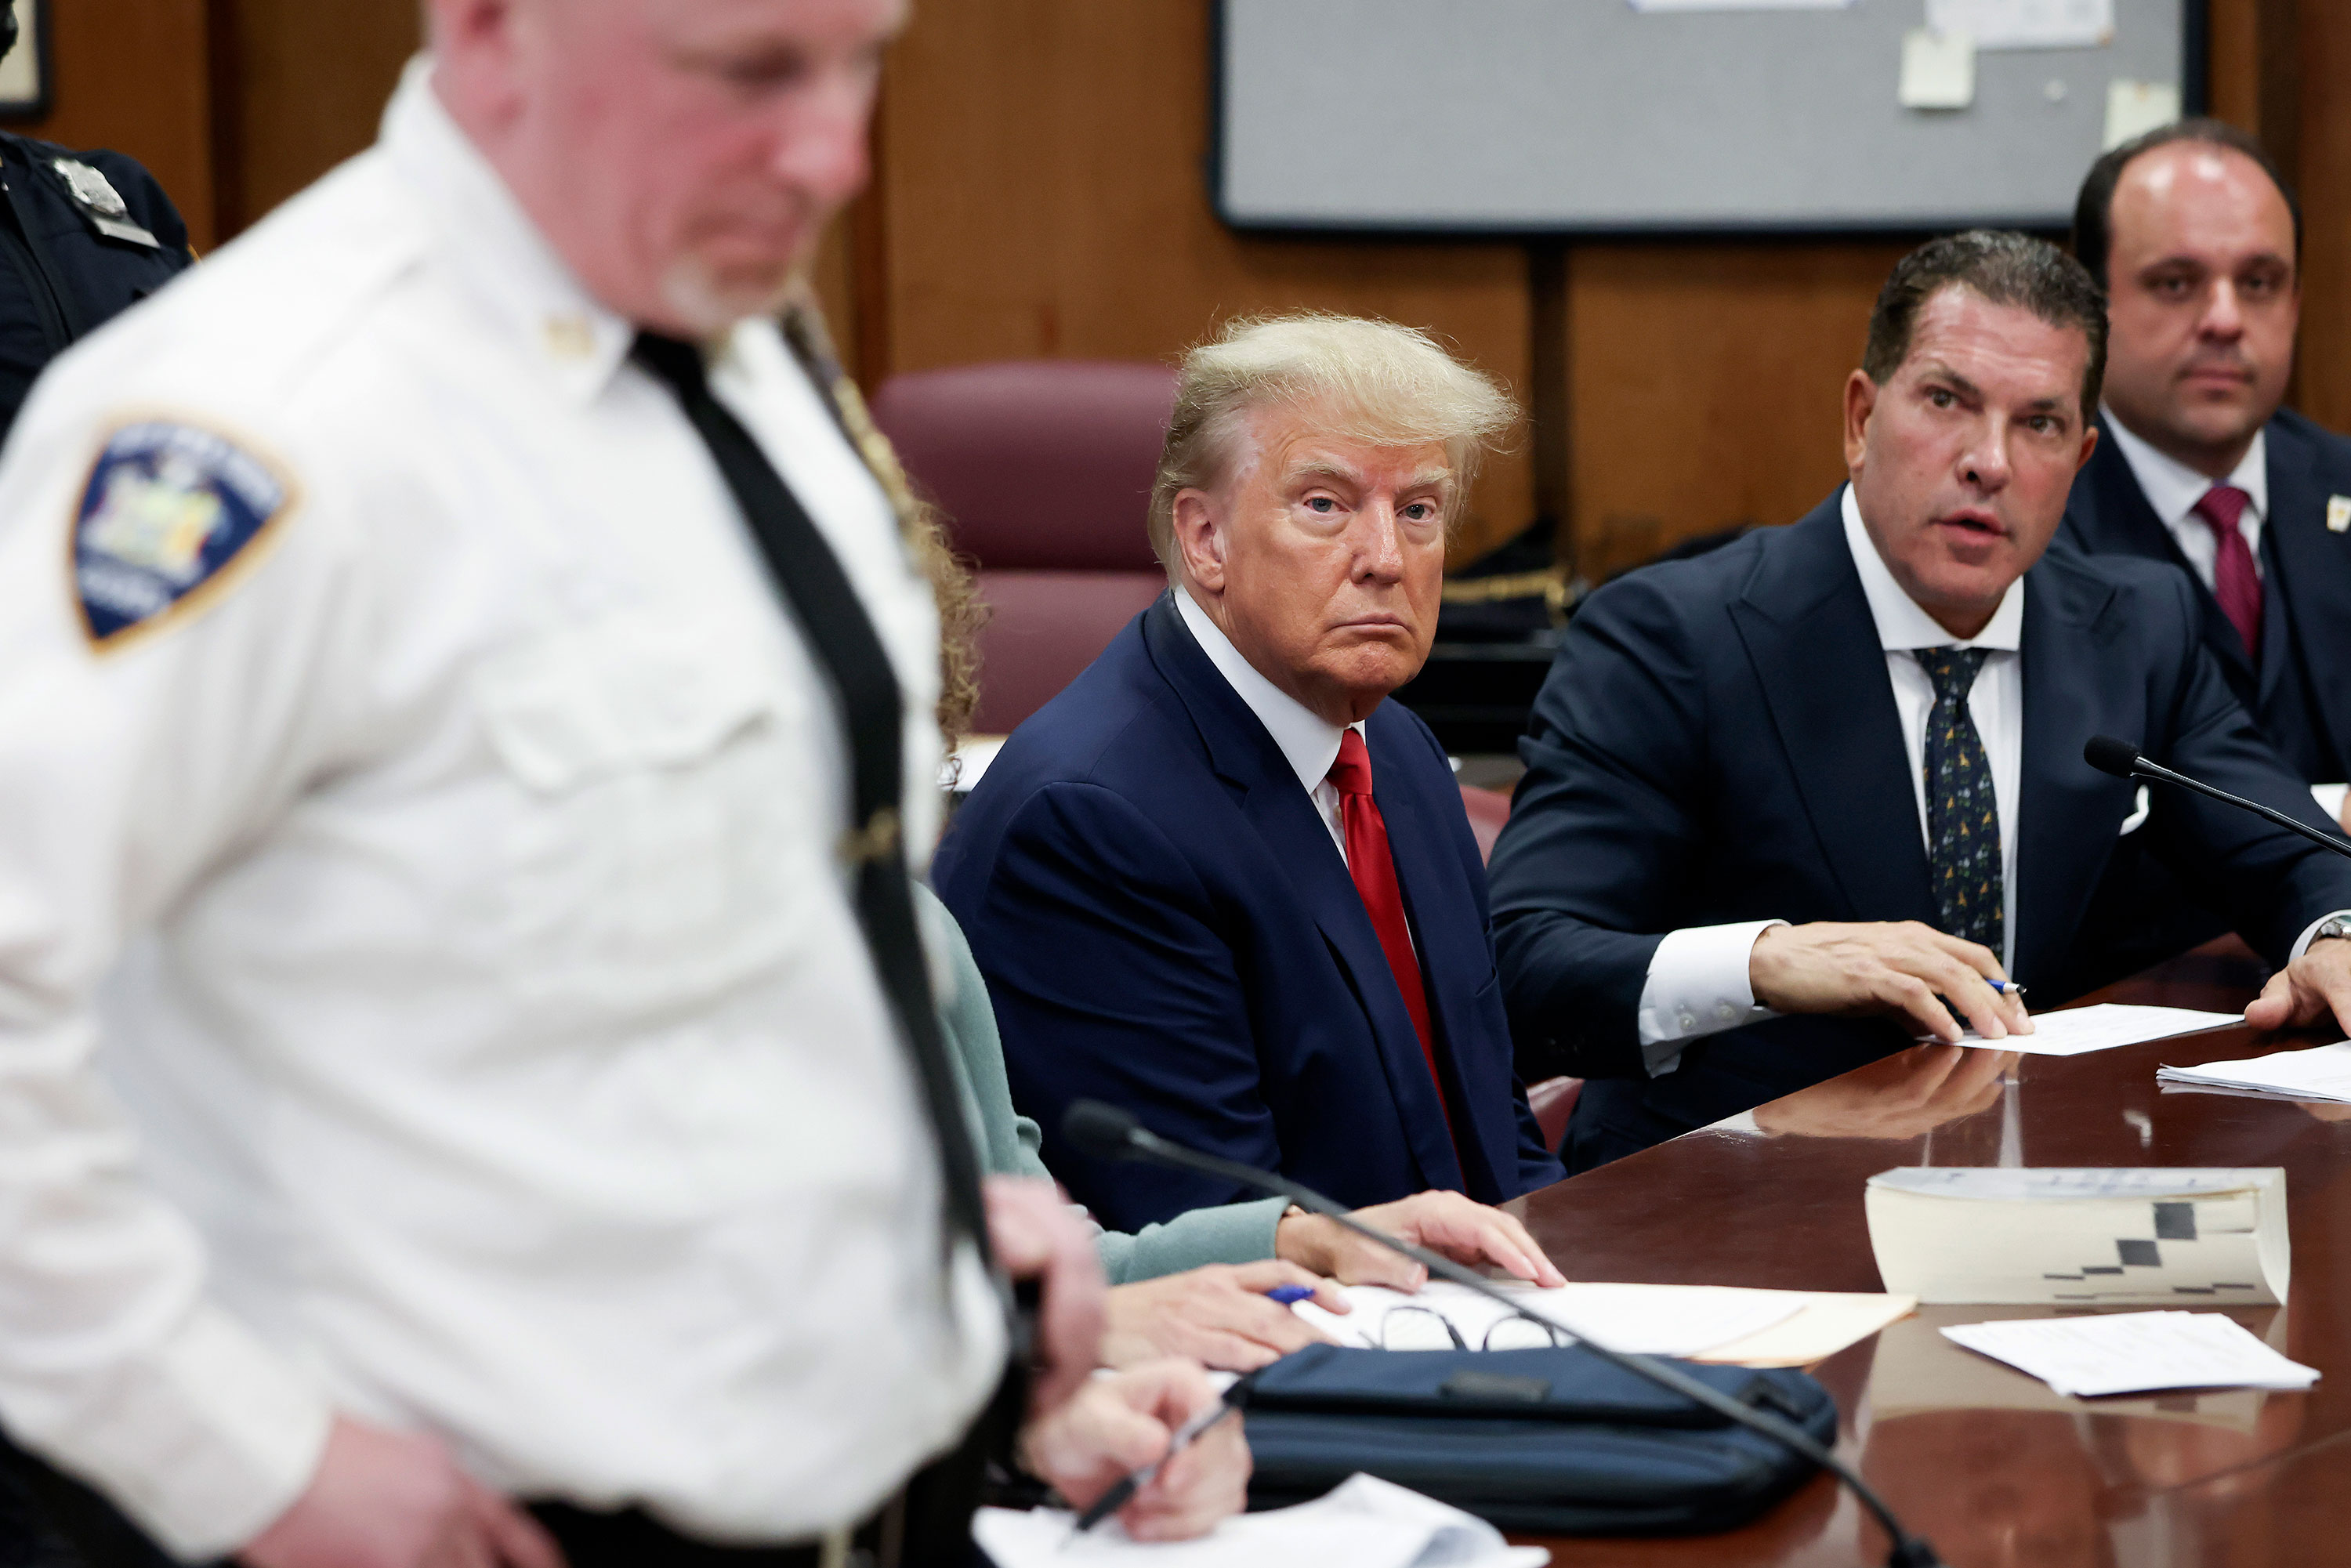 Former President Donald Trump sits with his attorneys during his arraignment at the Manhattan Criminal Court in New York on April 4. Trump pleaded not guilty to 34 felony counts stemming from hush money payments made to adult film star Stormy Daniels.